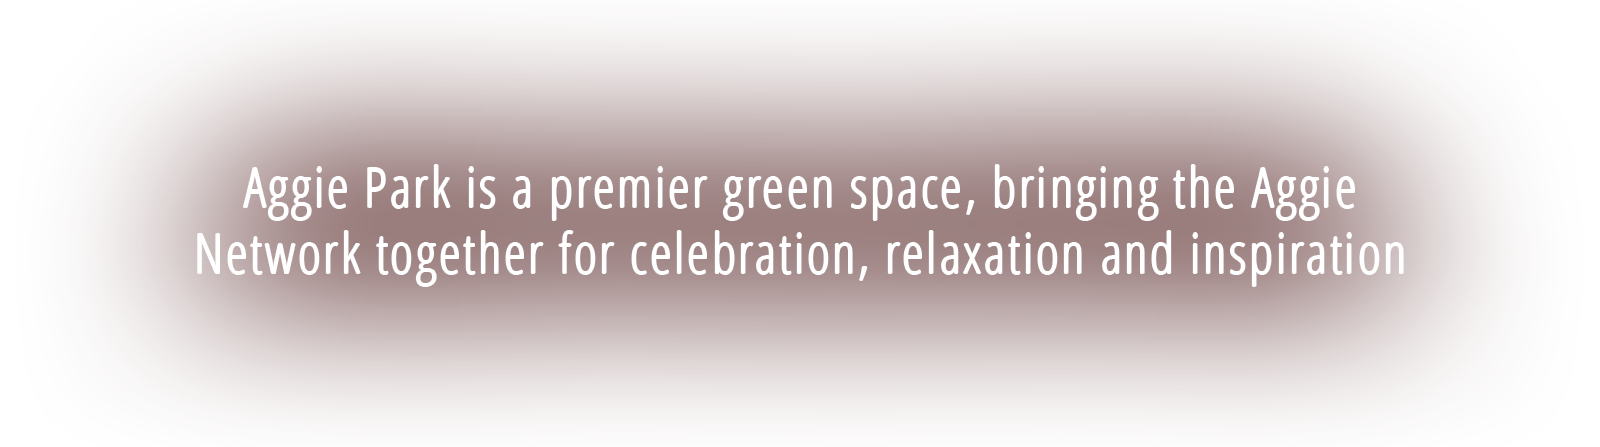 Aggie Park will be a premier green space, bringing the Aggie Network together for celebration, relaxation and inspiration